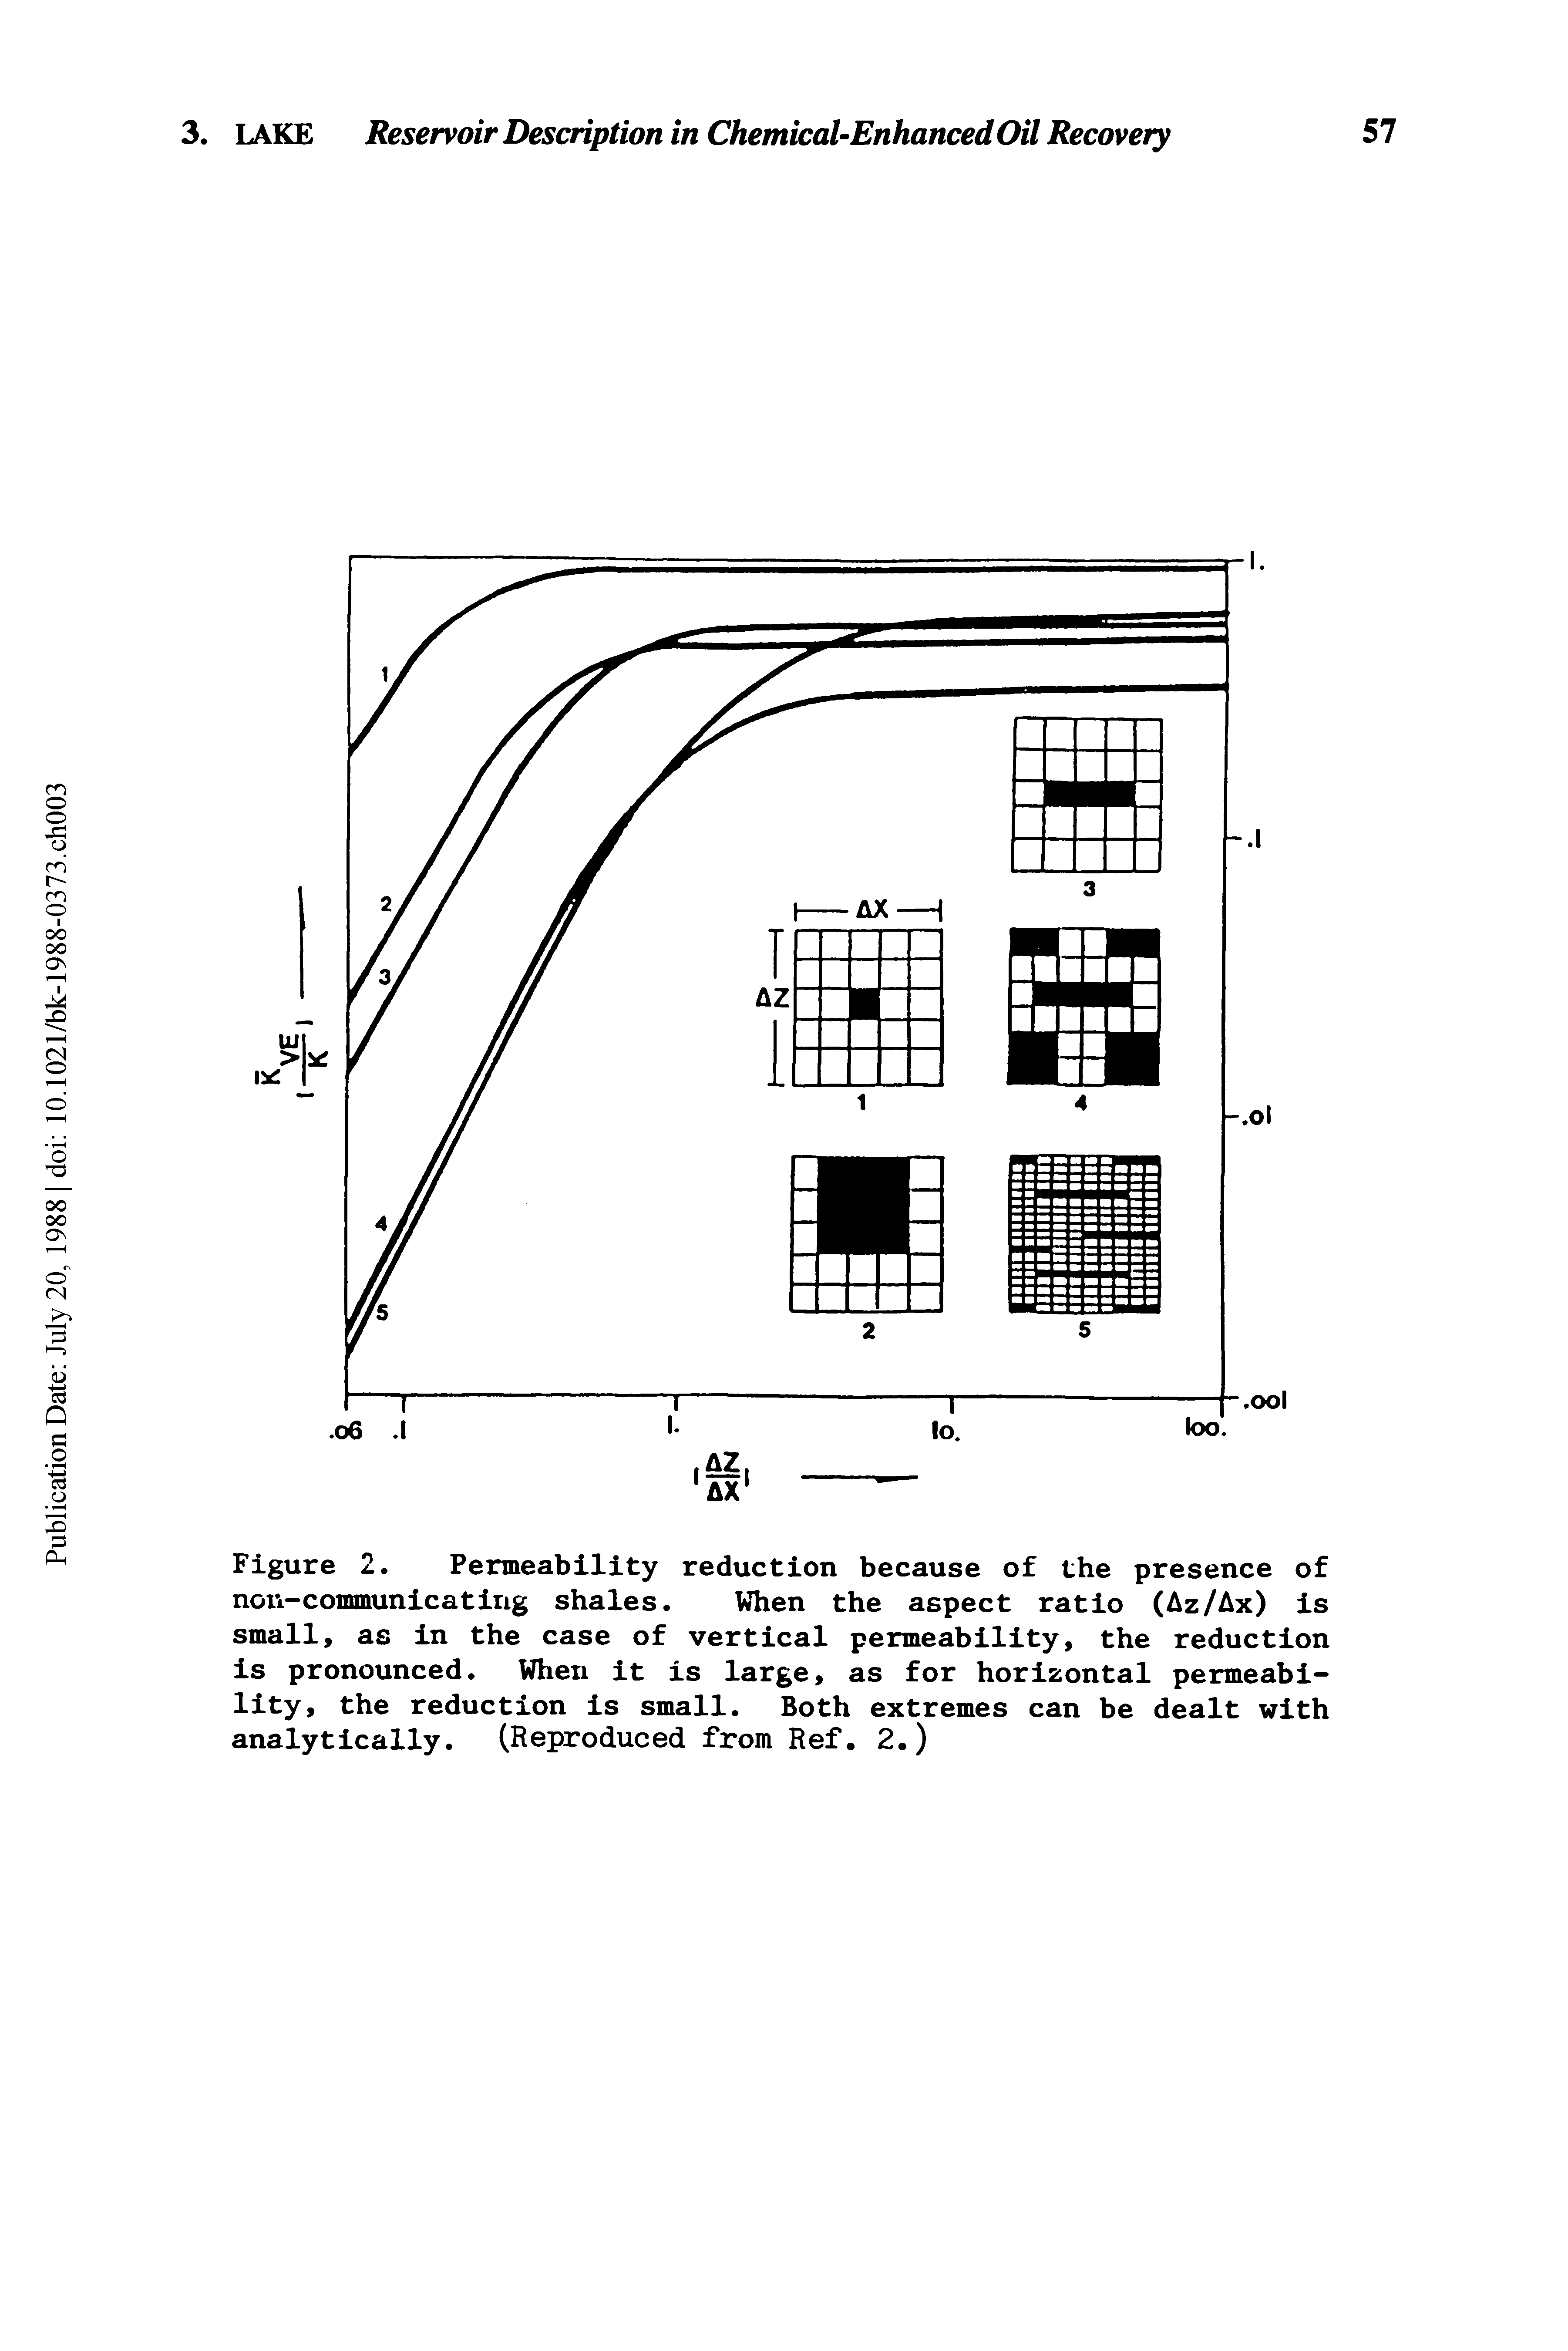 Figure 2. Permeability reduction because of the presence of non-communicating shales. When the aspect ratio (Az/Ax) is small, as in the case of vertical permeability, the reduction is pronounced. When it is large, as for horizontal permeability, the reduction is small. Both extremes can be dealt with analytically. (Reproduced from Ref. 2.)...